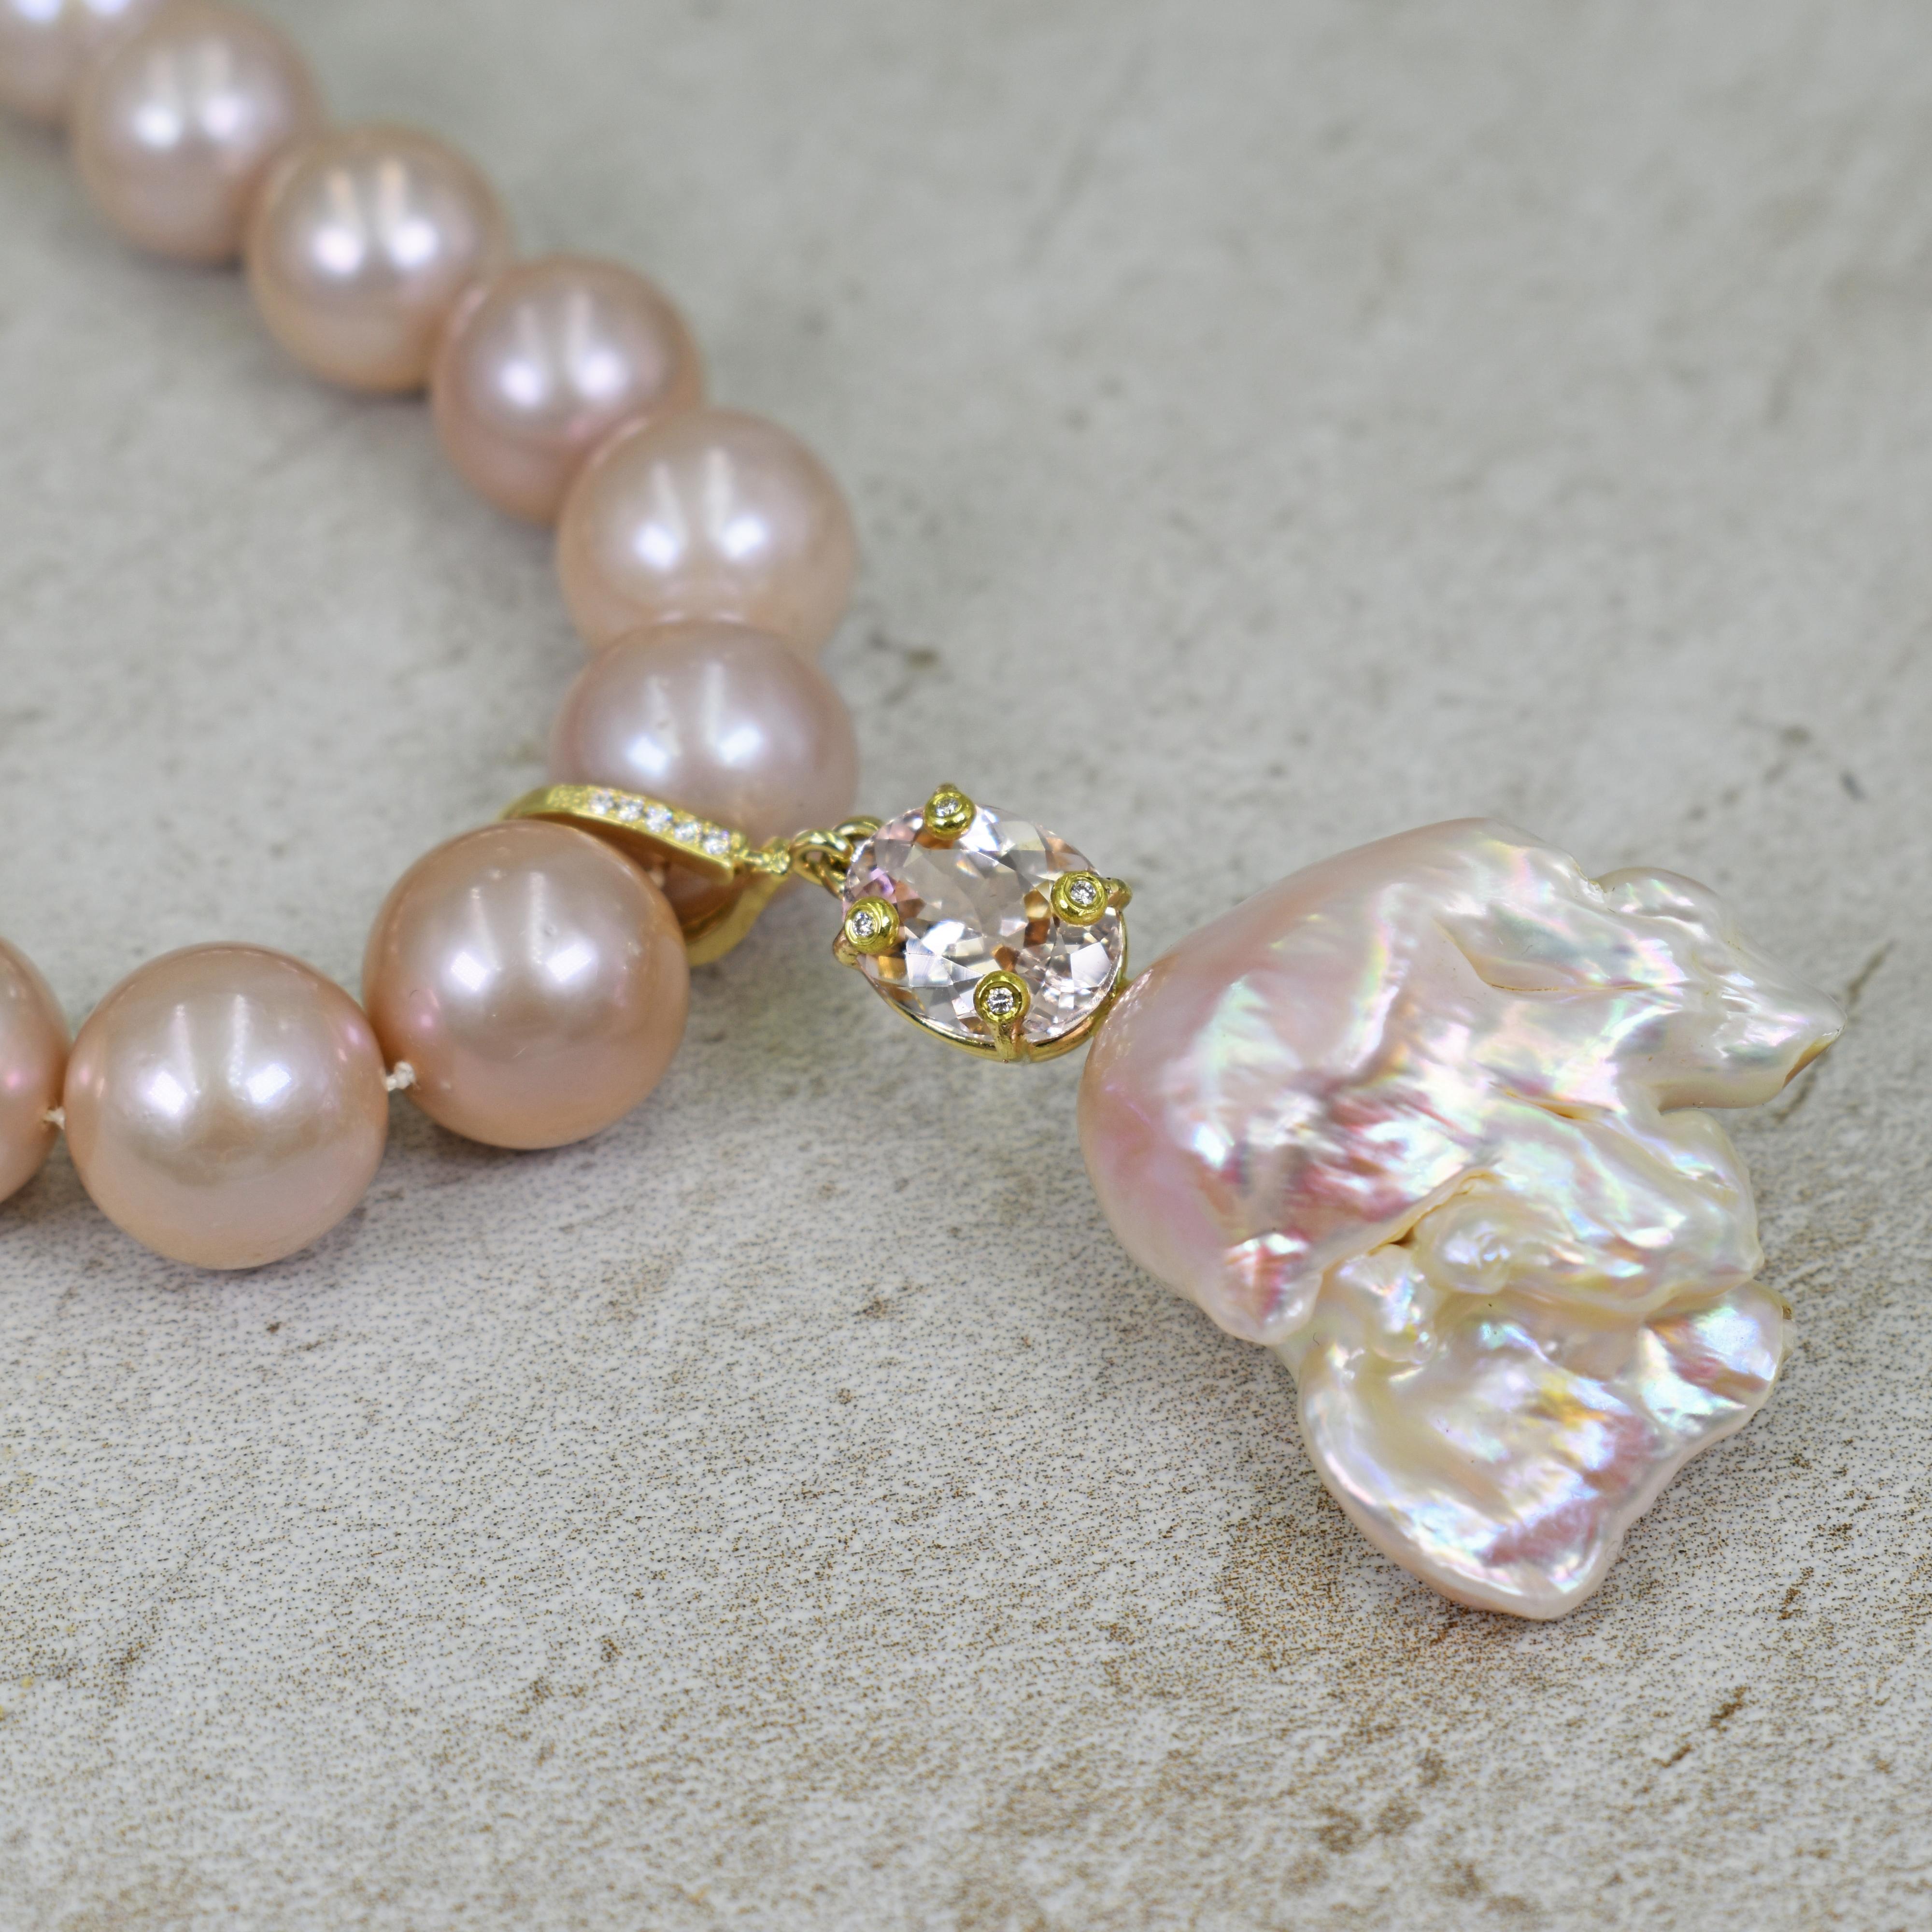 Gorgeous, large peachy pink Baroque Pearl, oval 5.04 carat Morganite and accent white diamond 14k yellow gold enhancer pendant on a graduated, round 12-15mm pink freshwater pearl beaded necklace. Necklace is finished with 14k gold chain and a swivel